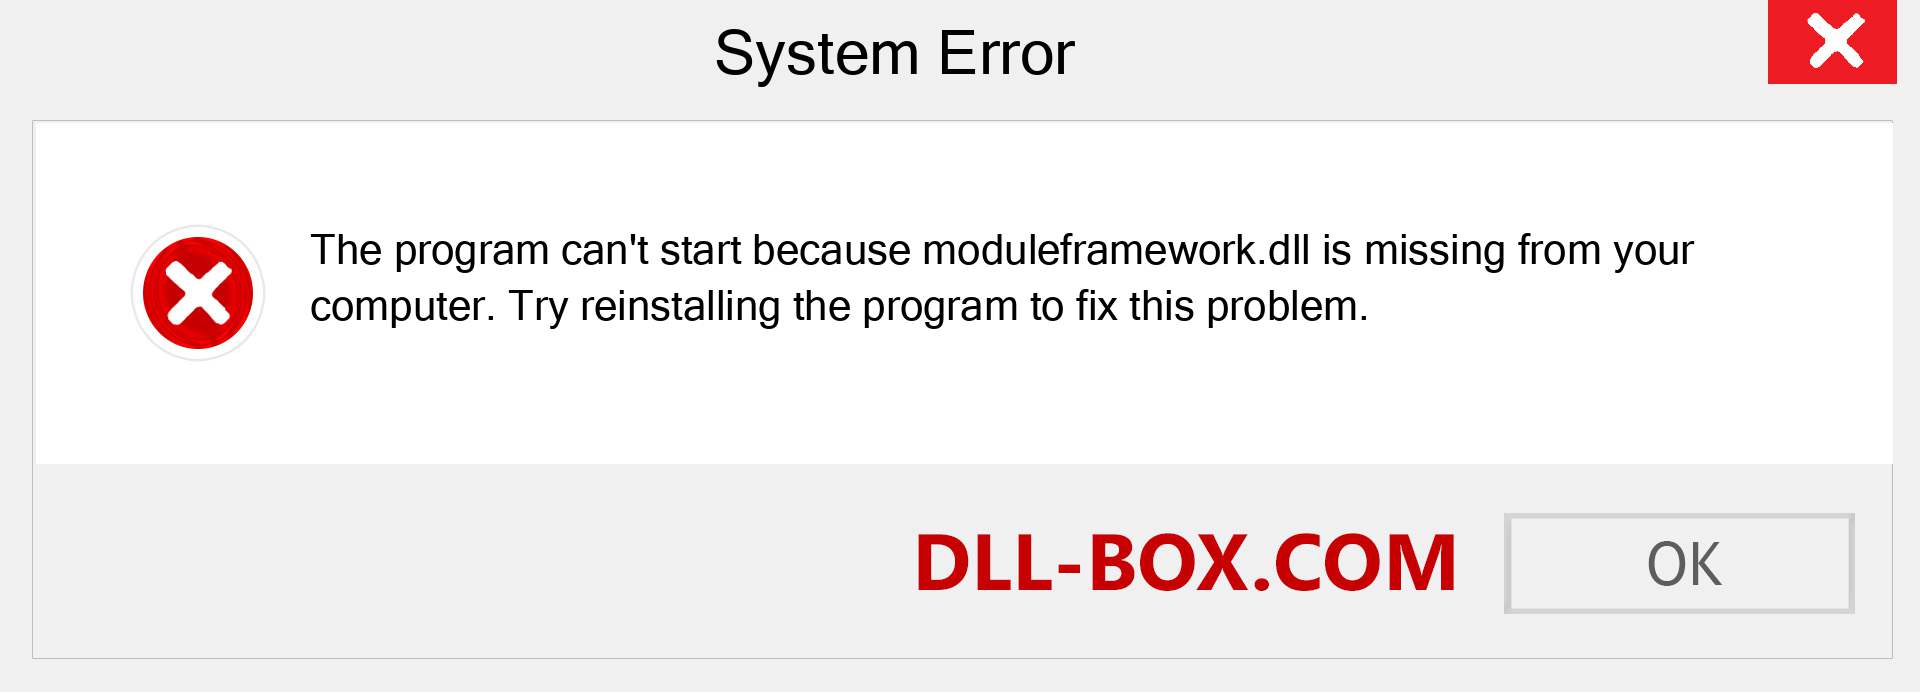  moduleframework.dll file is missing?. Download for Windows 7, 8, 10 - Fix  moduleframework dll Missing Error on Windows, photos, images